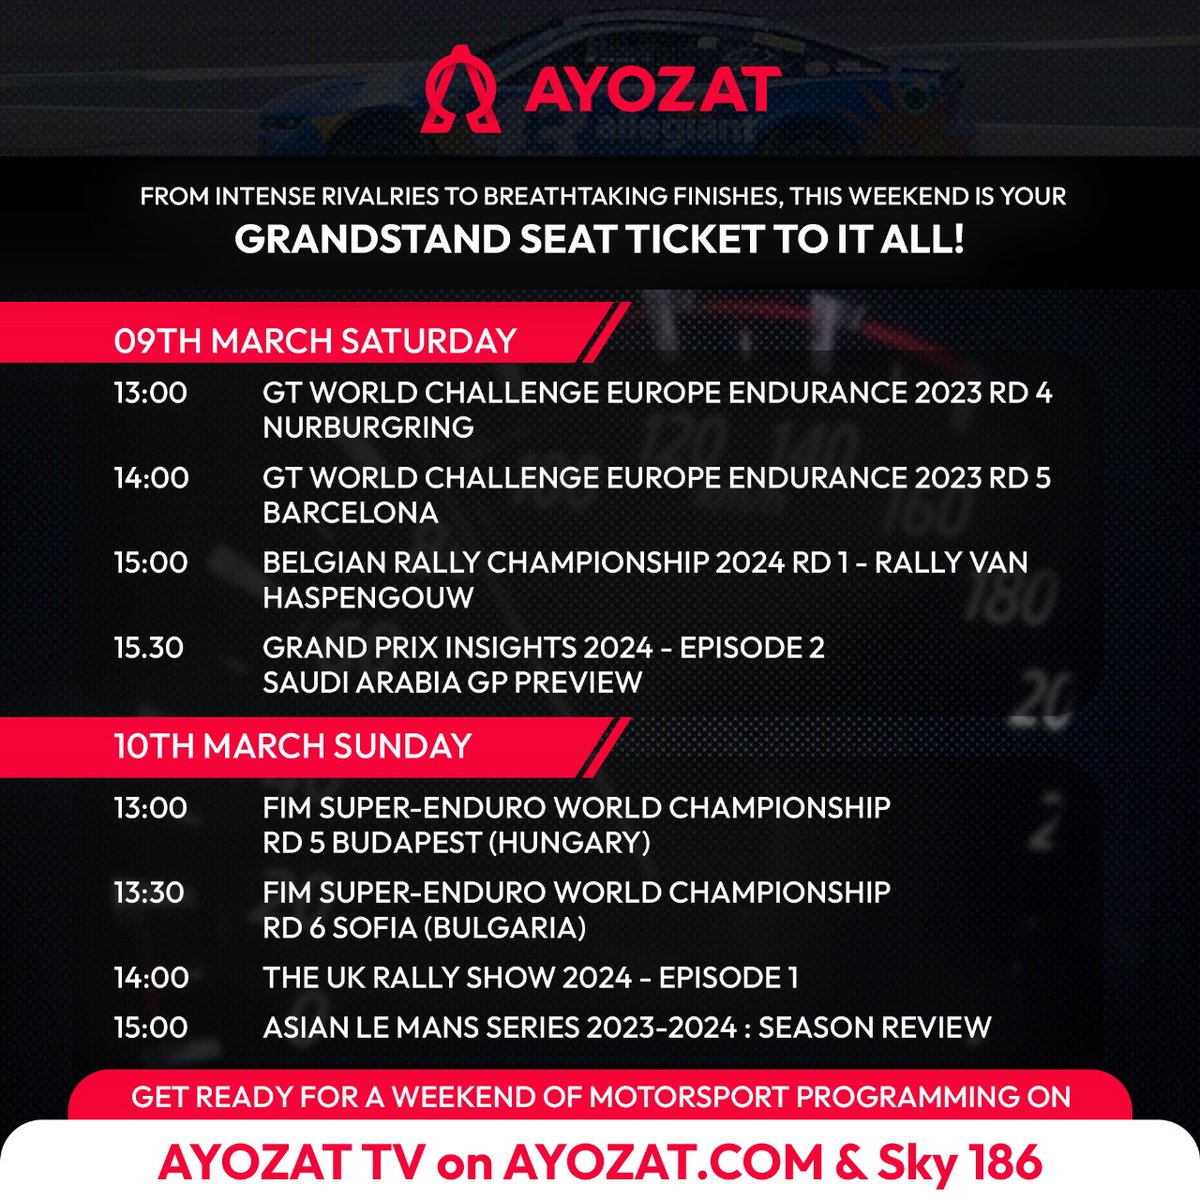 Ready, set, weekend! Join us on AYOZAT TV at ayozat.com and Sky 186 from 1 PM on Saturdays and Sundays for a motorsport spectacle. From roaring engines to gripping races, it's a non-stop adrenaline rush!
#motorsport #cars #racing #action #weekendracing